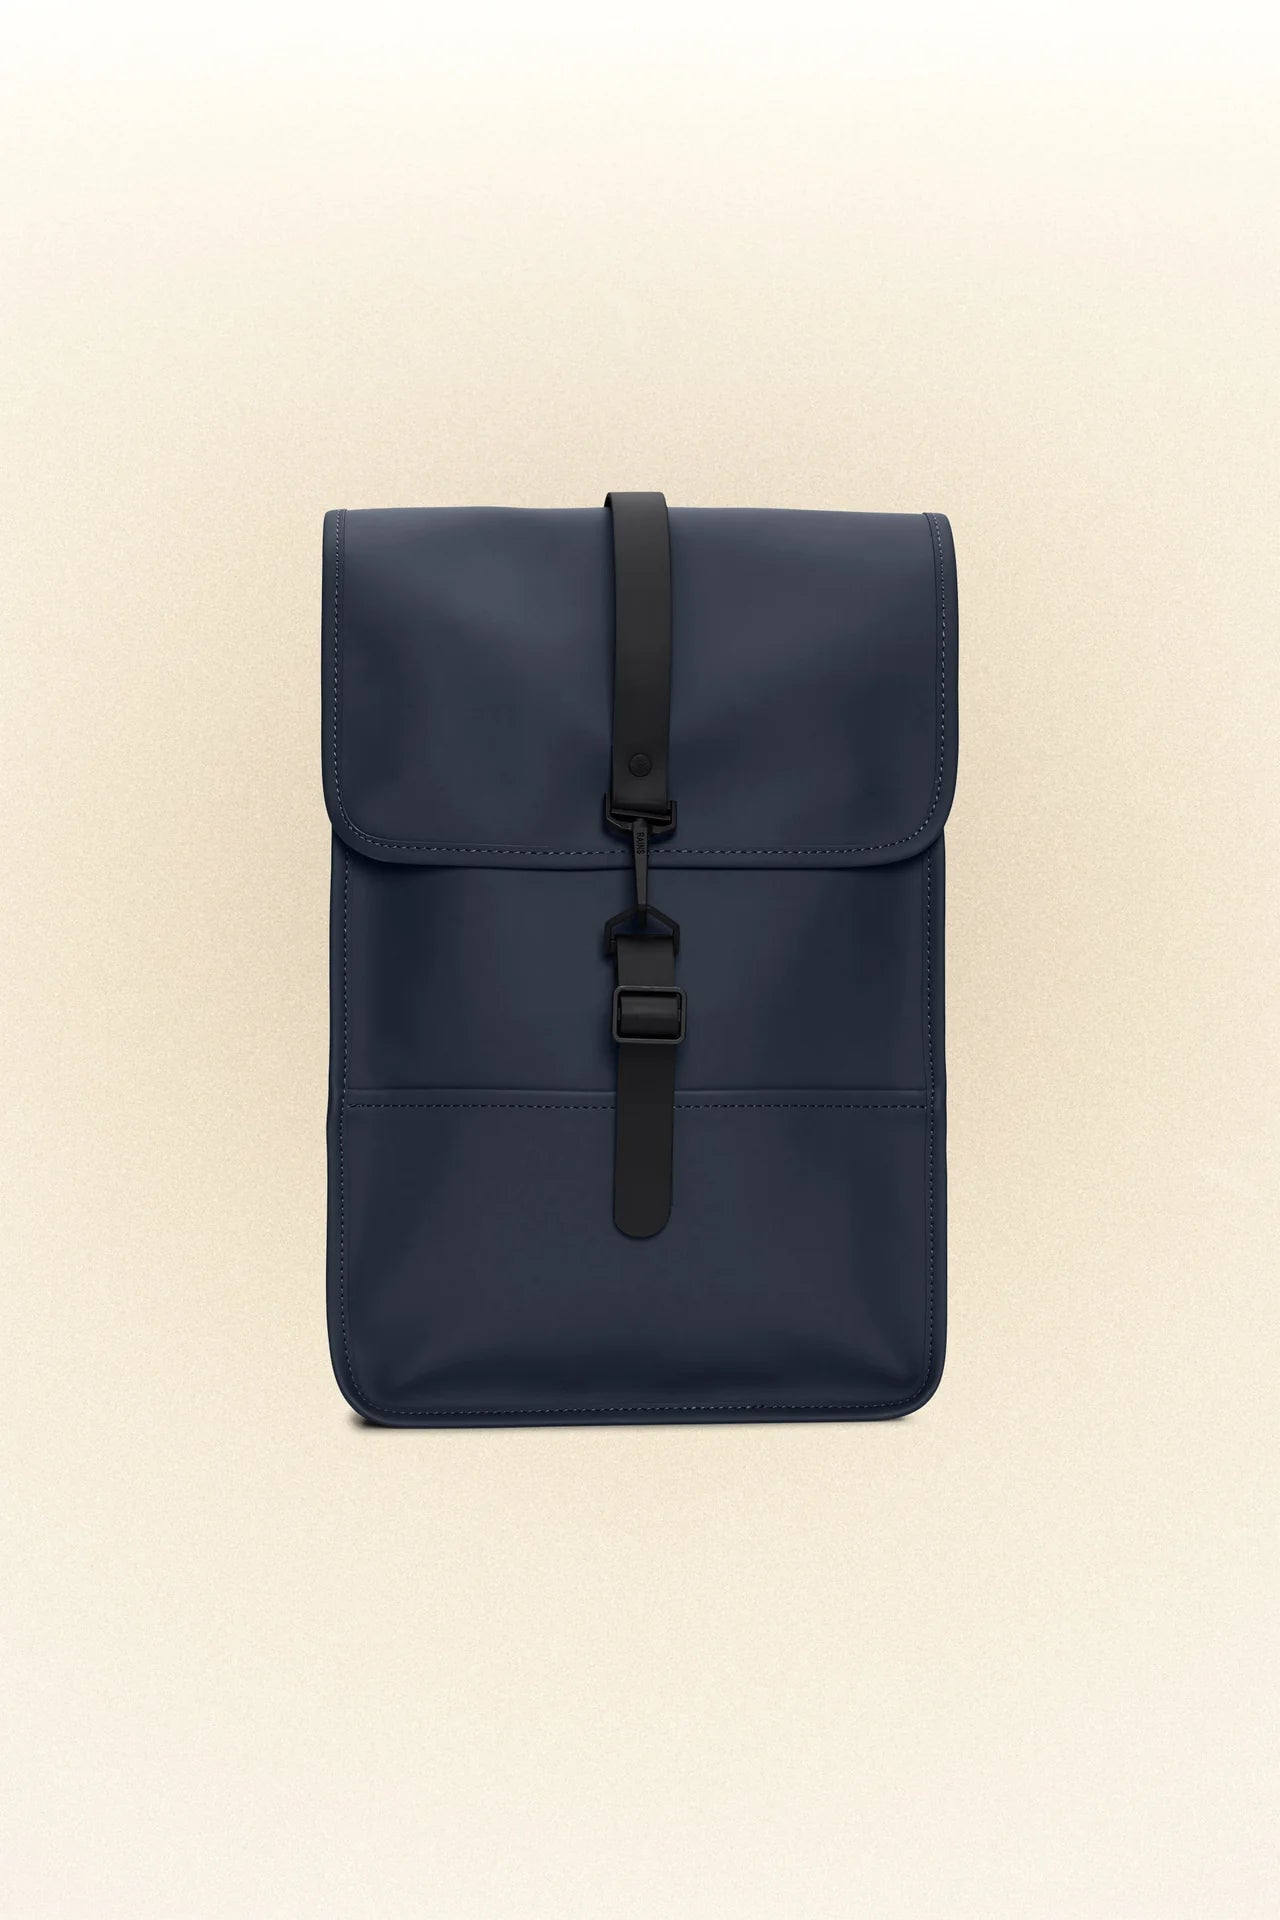 A small blue Rains Backpack Mini with black straps, perfect for carrying essentials.